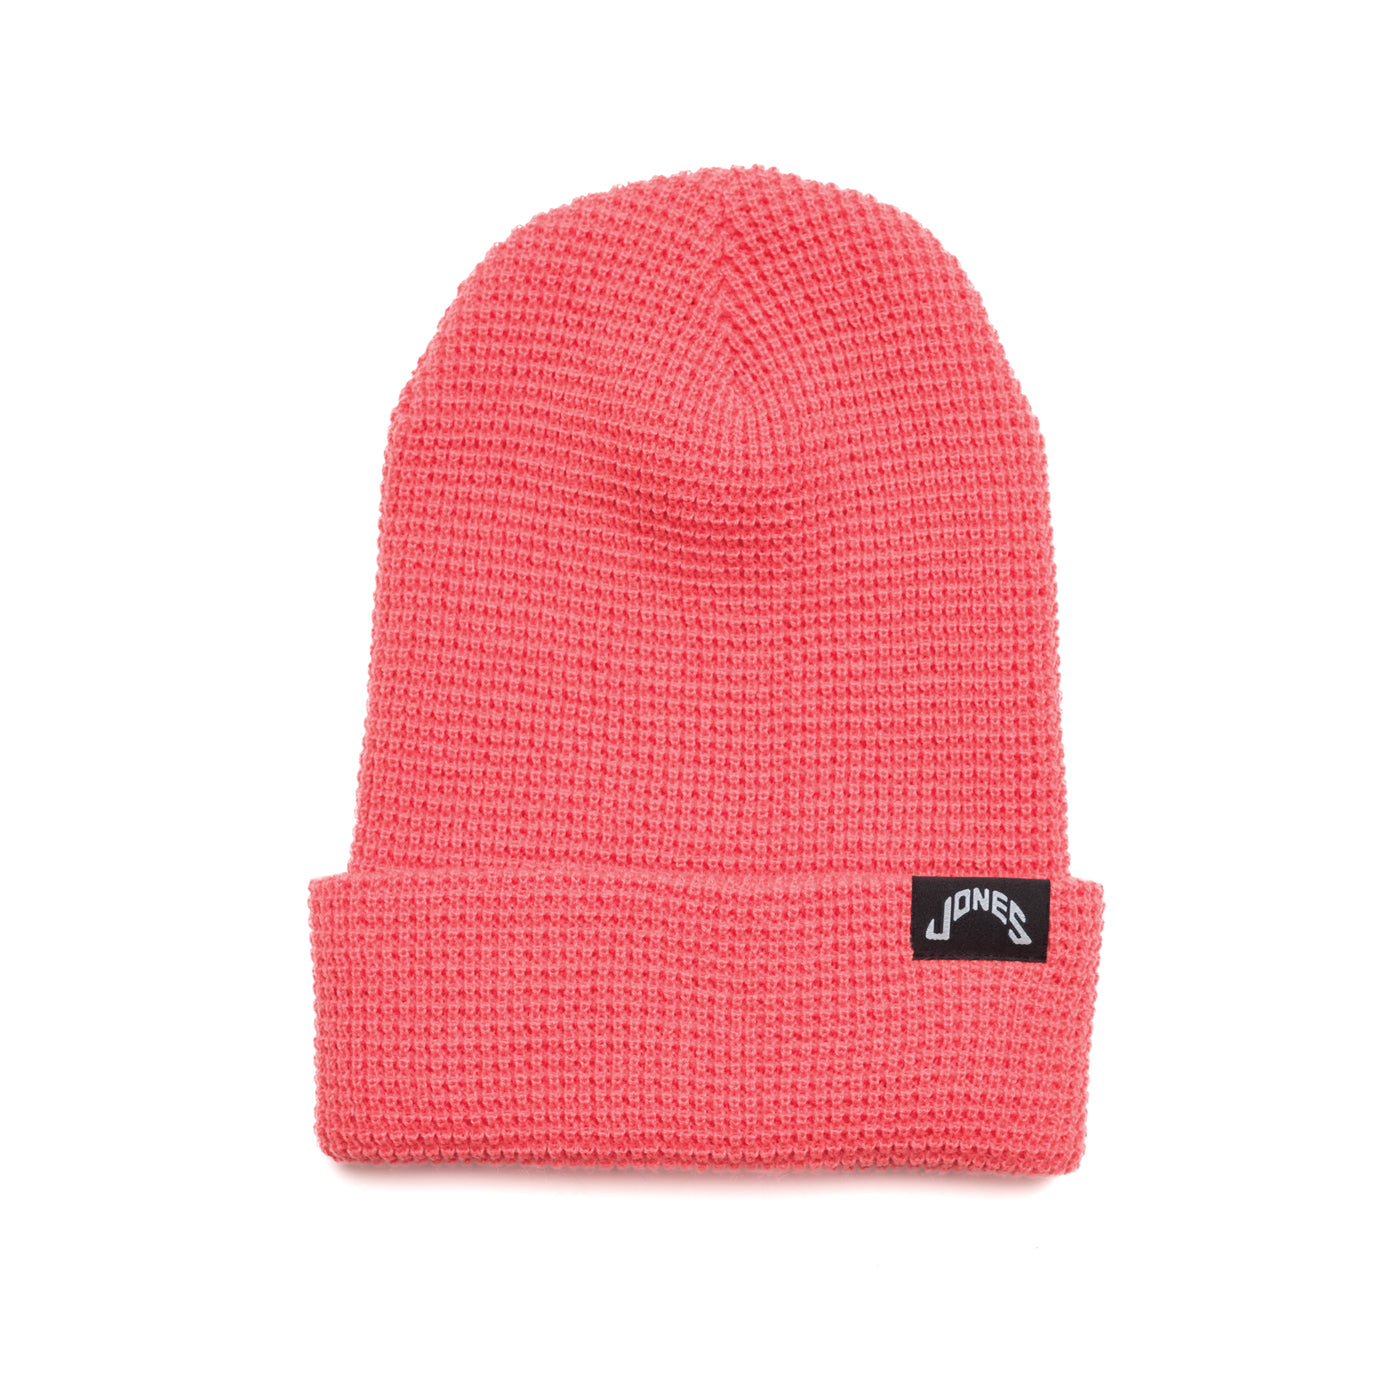 Arched Jones Knit Beanie - Coral